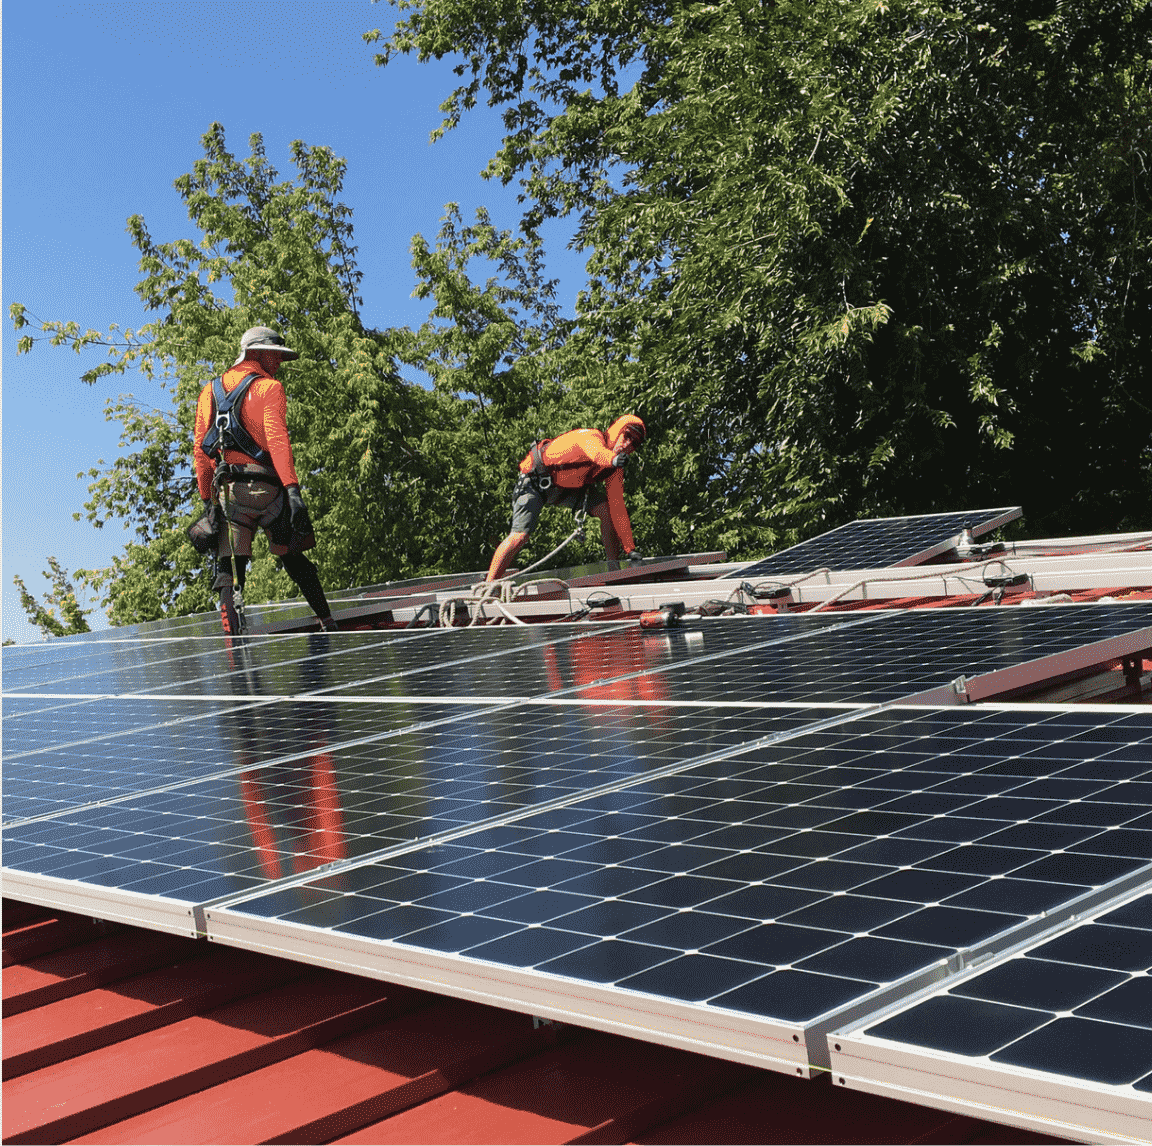 Workers with Solar Panels